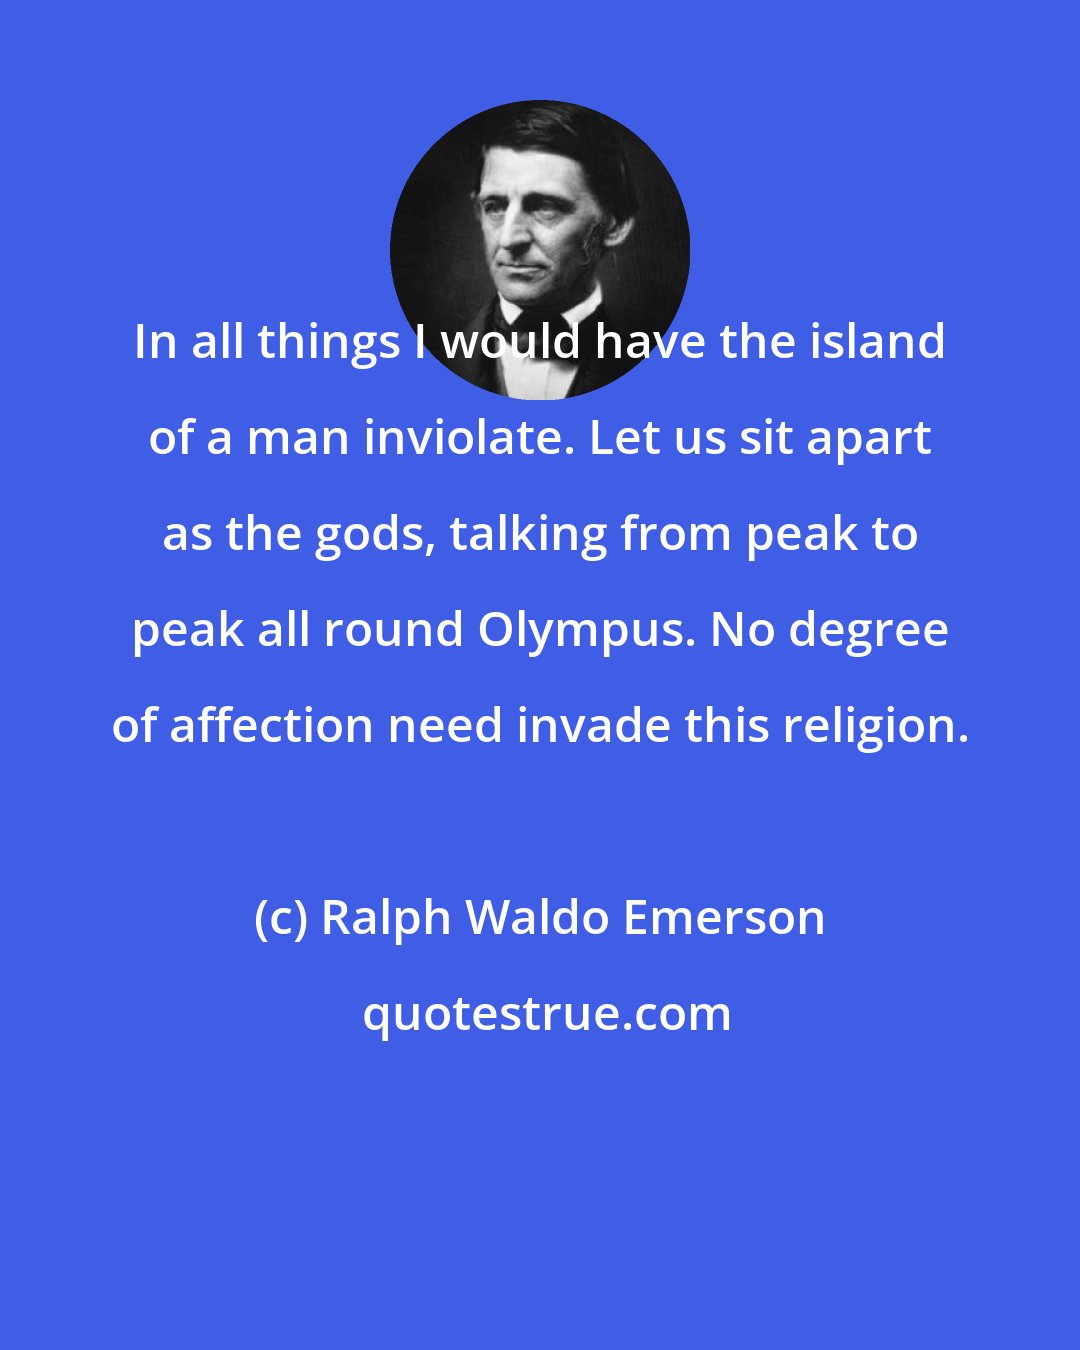 Ralph Waldo Emerson: In all things I would have the island of a man inviolate. Let us sit apart as the gods, talking from peak to peak all round Olympus. No degree of affection need invade this religion.